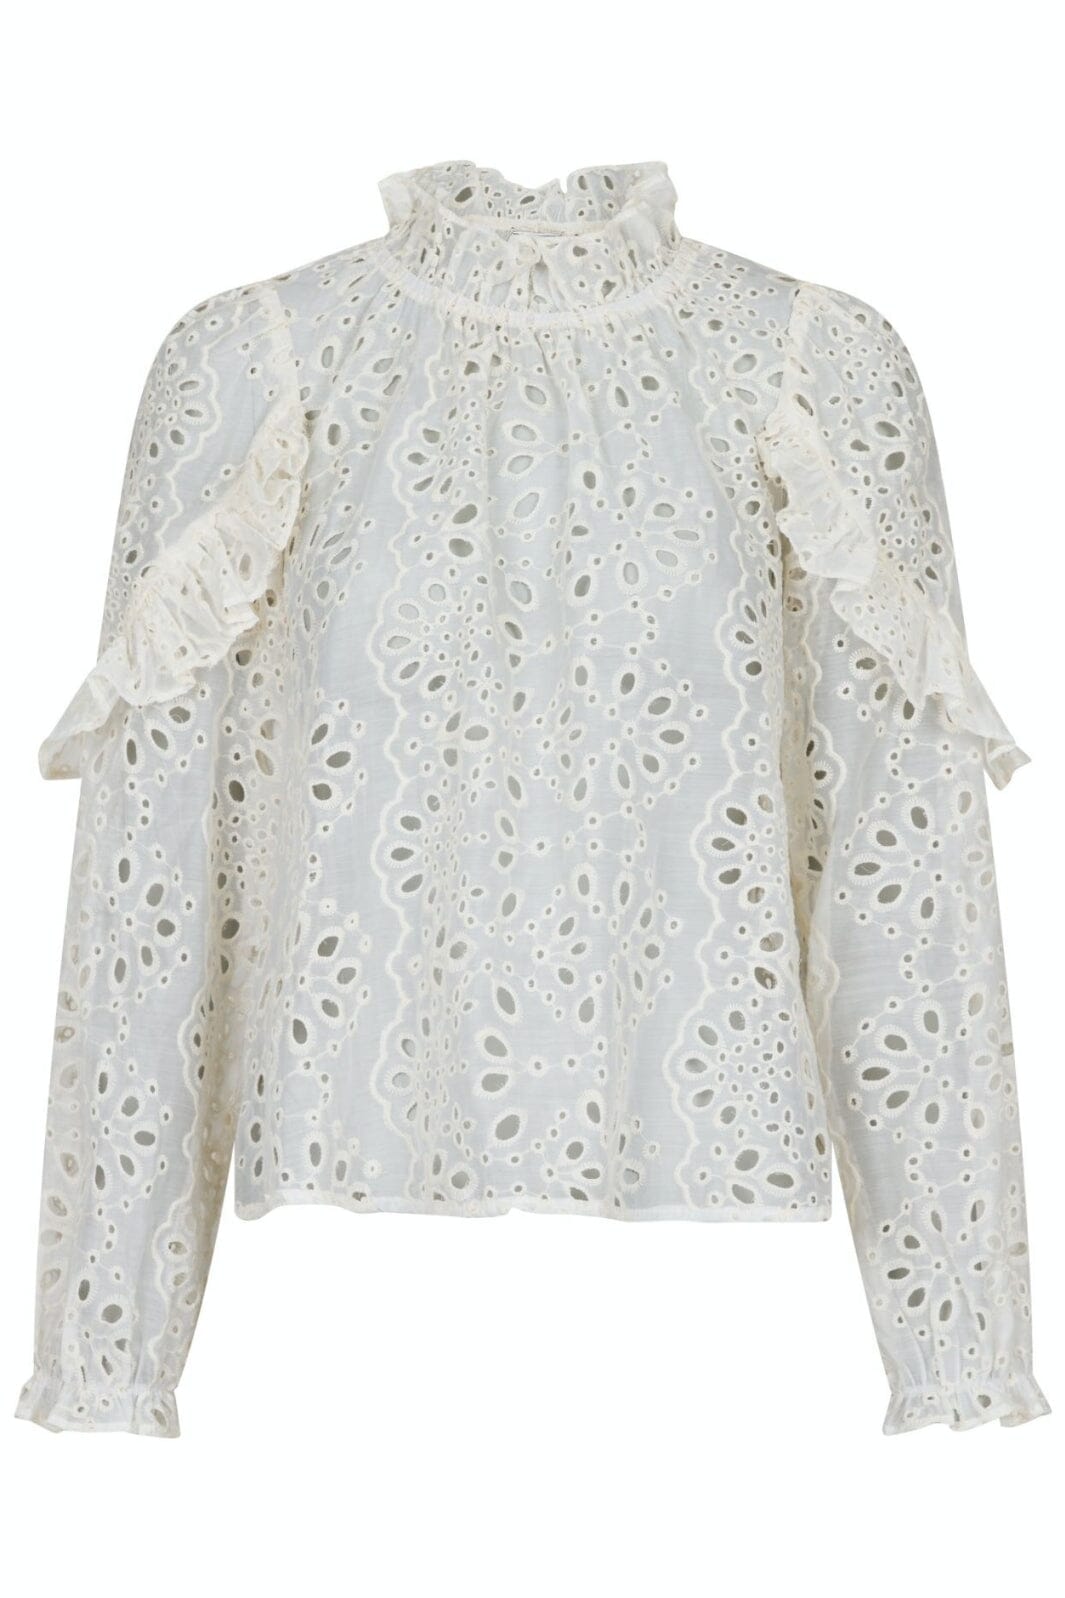 Neo Noir - Nadira Embroidery Blouse - Ivory Bluser 